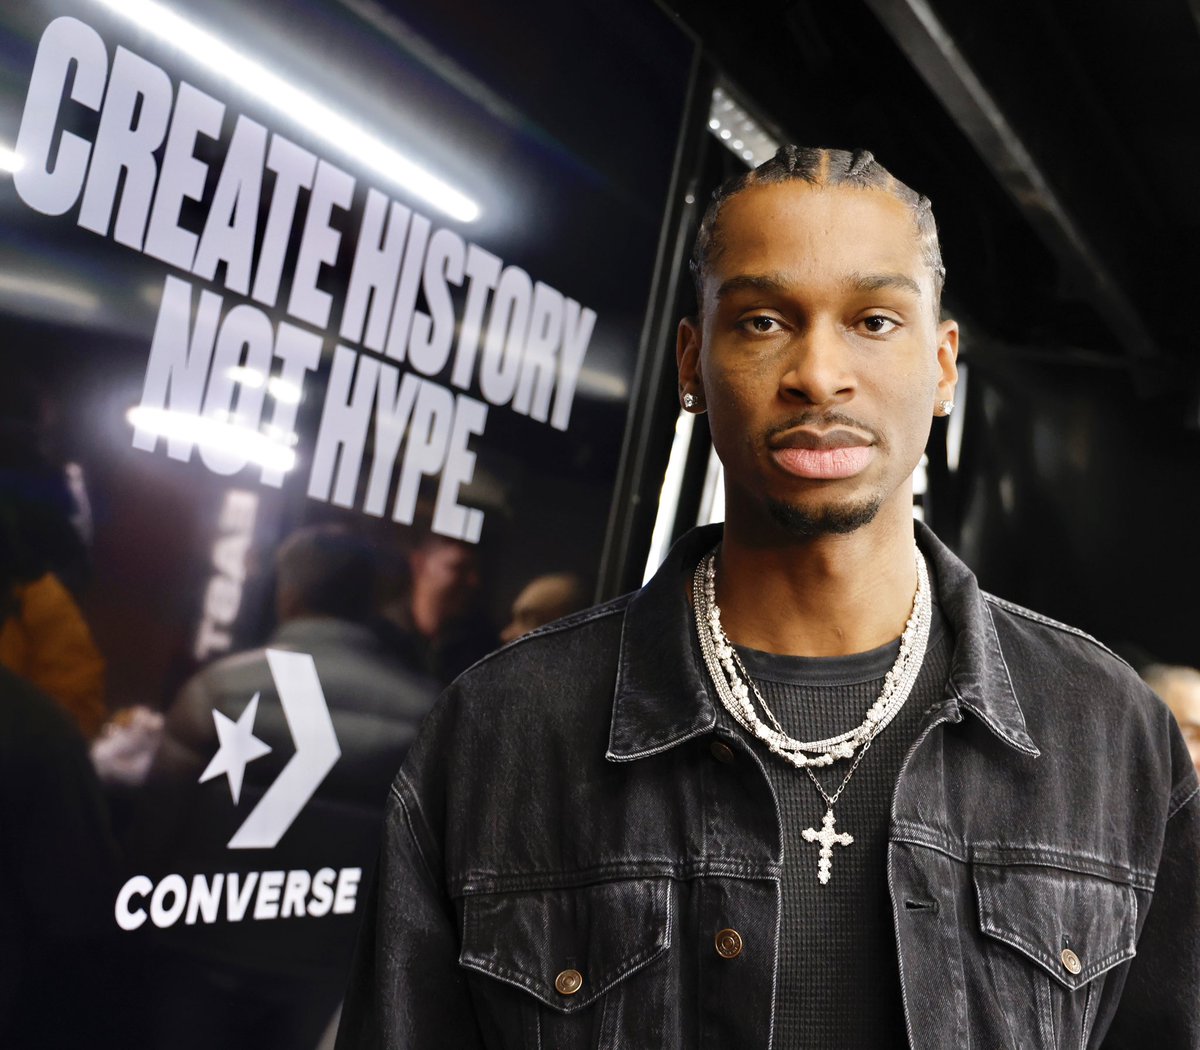 BREAKING: OKC Thunder star Shai Gilgeous-Alexander has signed a multi-year shoe deal extension with Converse. 📄✍️ New deal makes SGA the Creative Director of Converse Basketball — and he has begun designing a Signature Footwear & Apparel collection that will release in 2025.